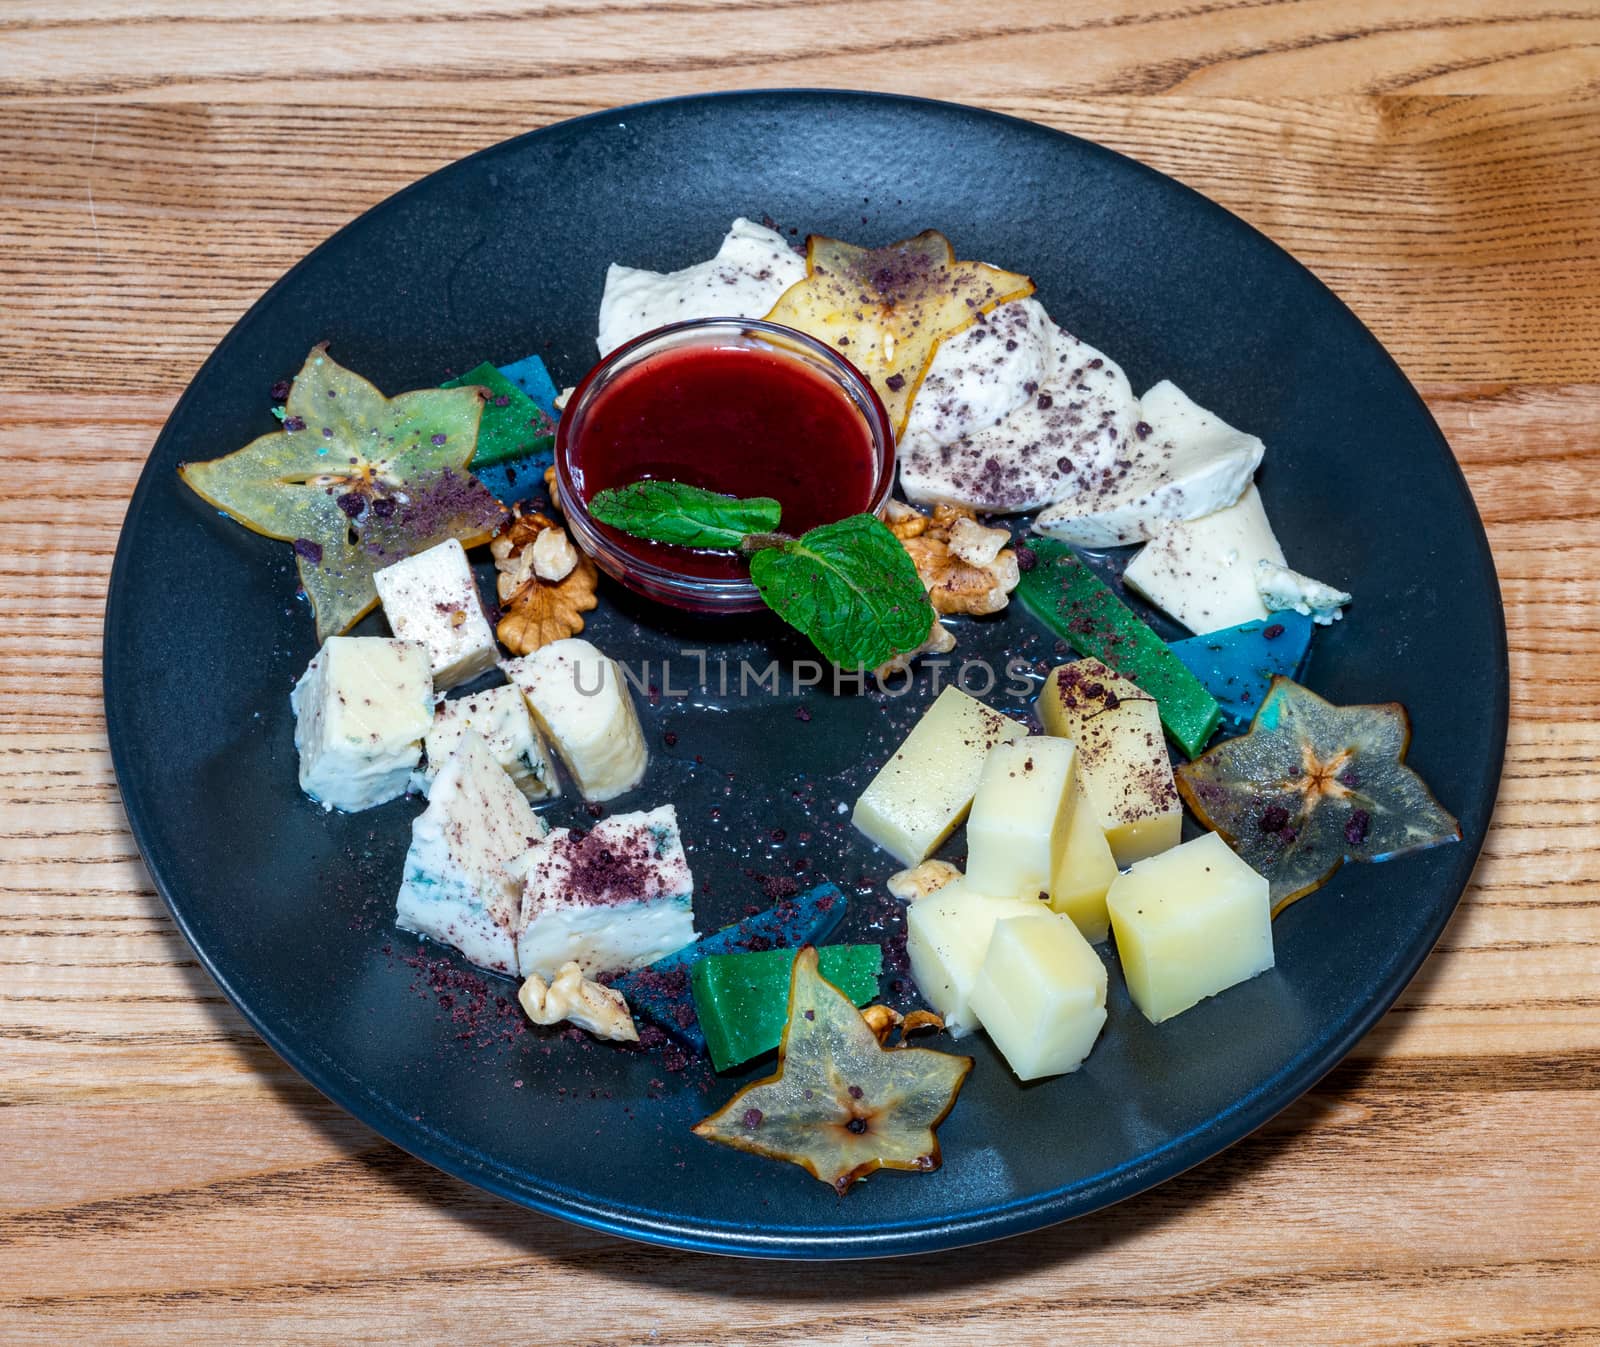 Farm cheeses. Three types of cheese and sauce on a black plate by Serhii_Voroshchuk